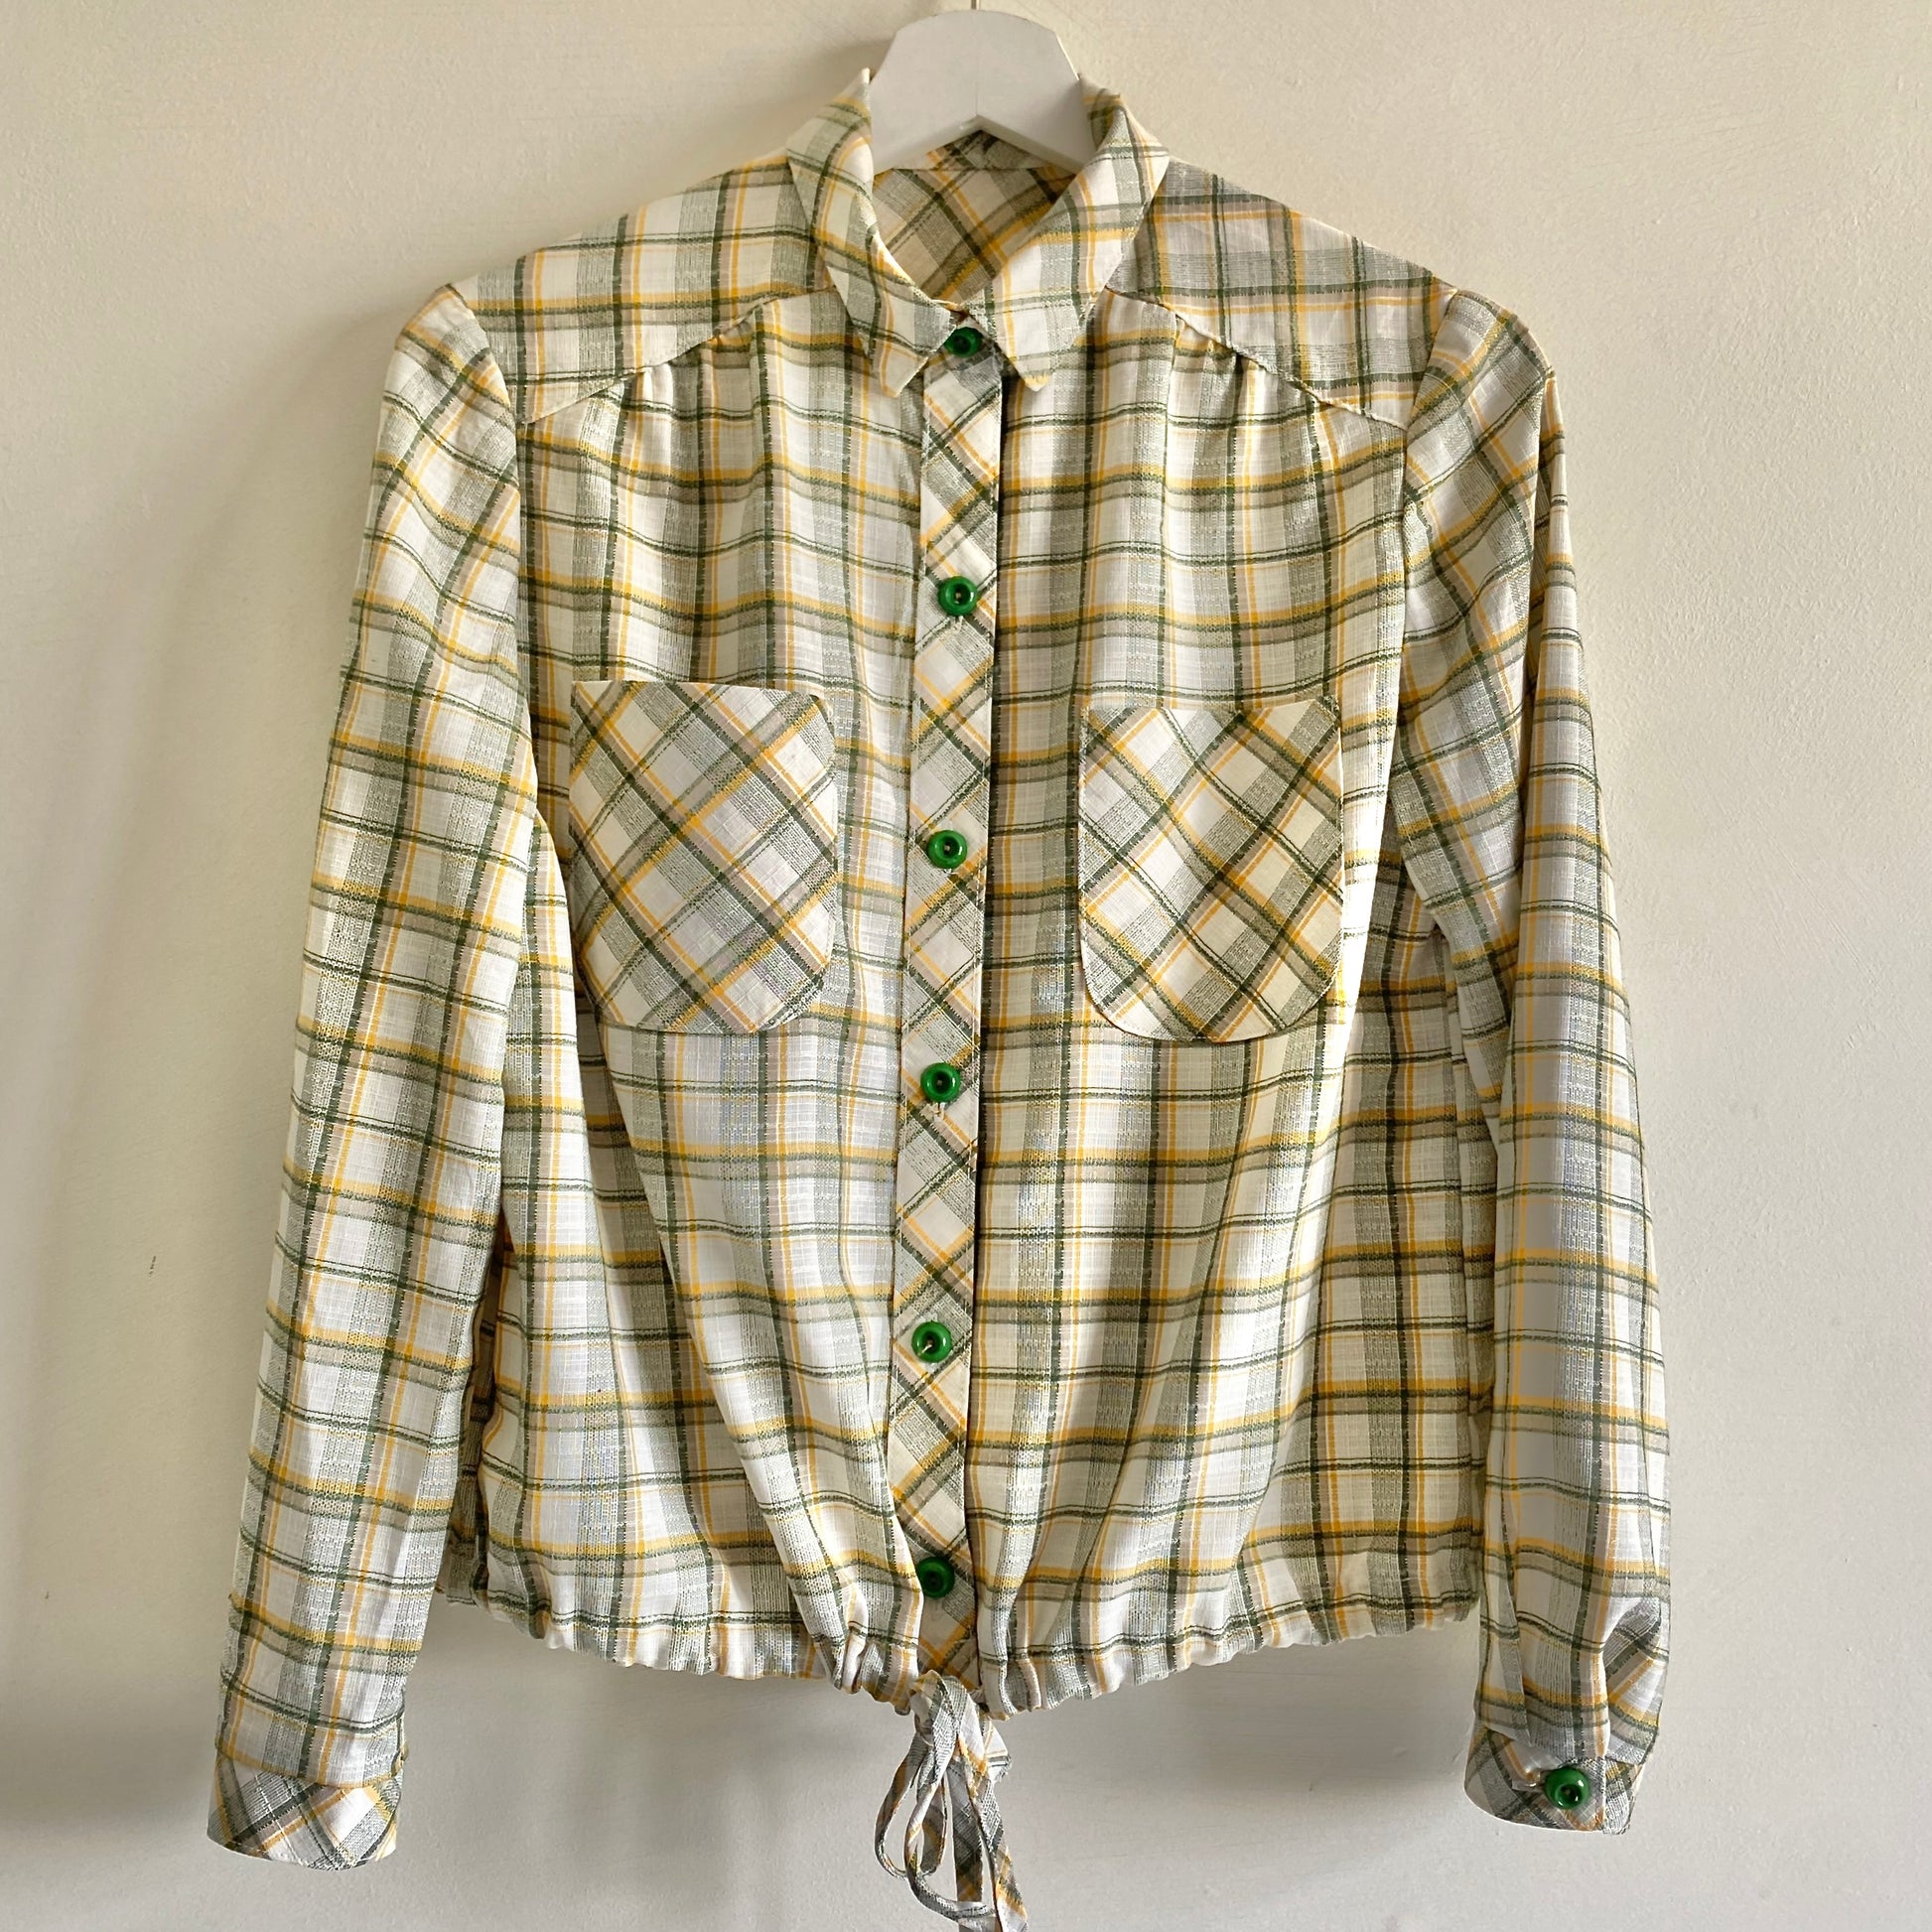 Early 80s vintage checked shirt Button down front fastening Two front chest pockets Single button cuff Drawstring waist detail